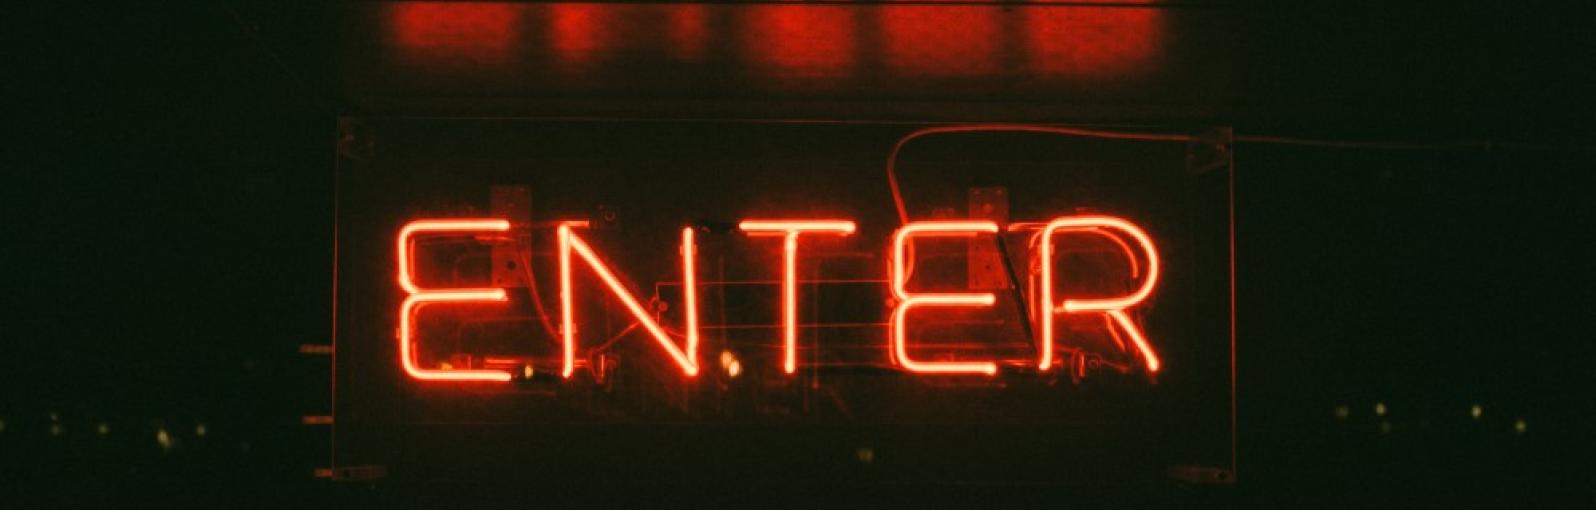 A neon sign showing the word 'ENTER'